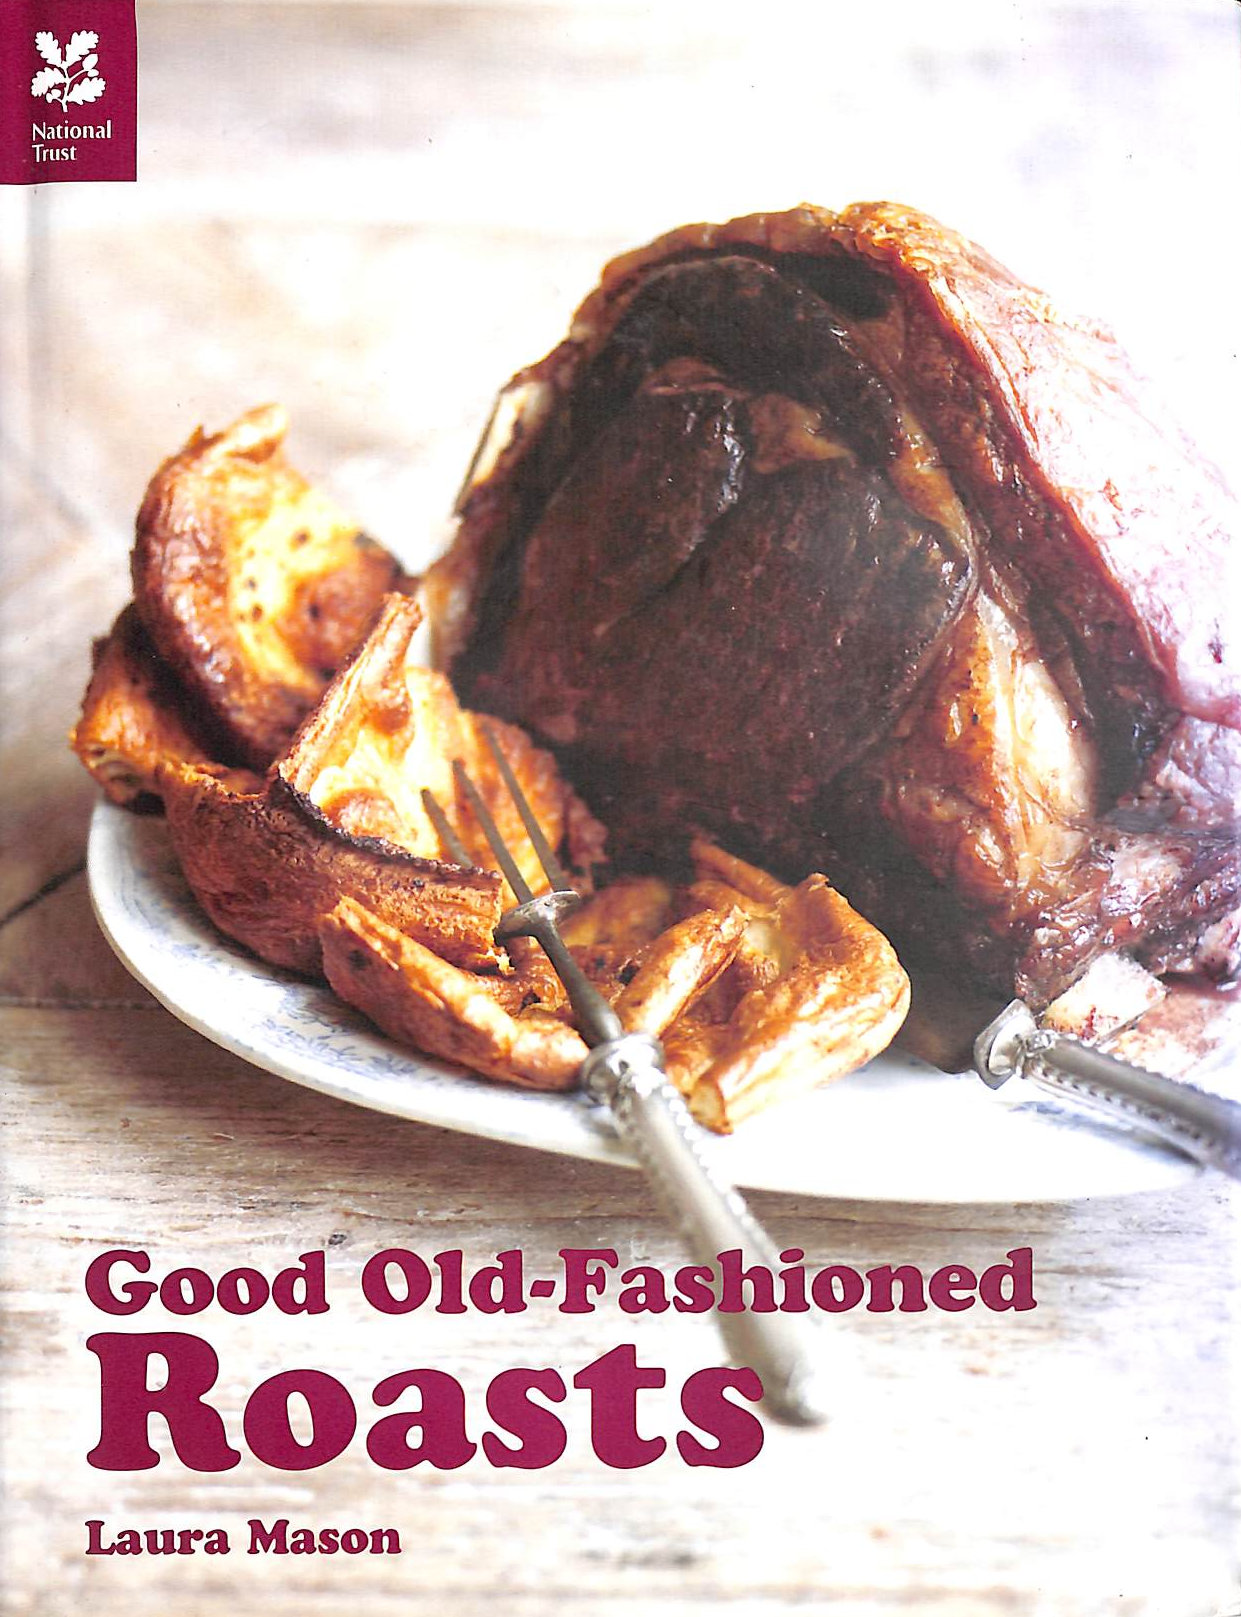 MASON, LAURA - Good Old-Fashioned Roasts: And Tasty Leftovers (National Trust Food)